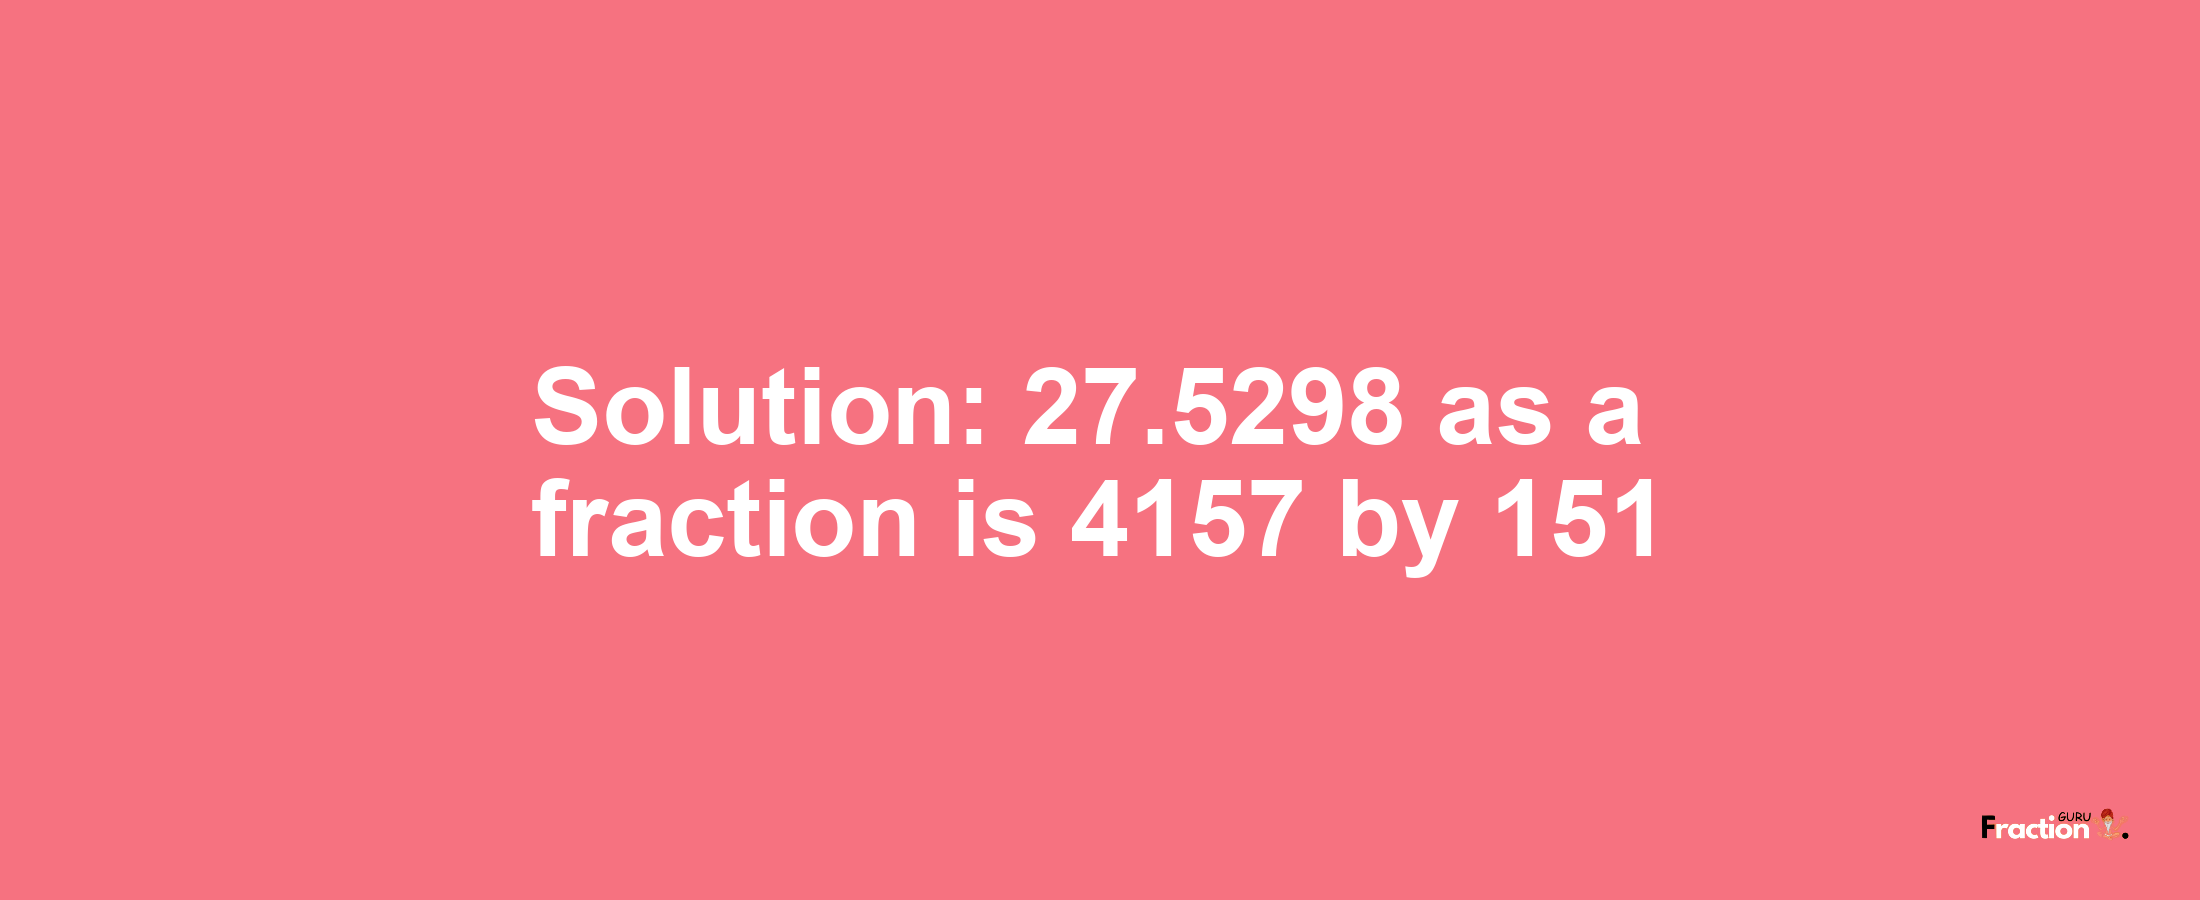 Solution:27.5298 as a fraction is 4157/151